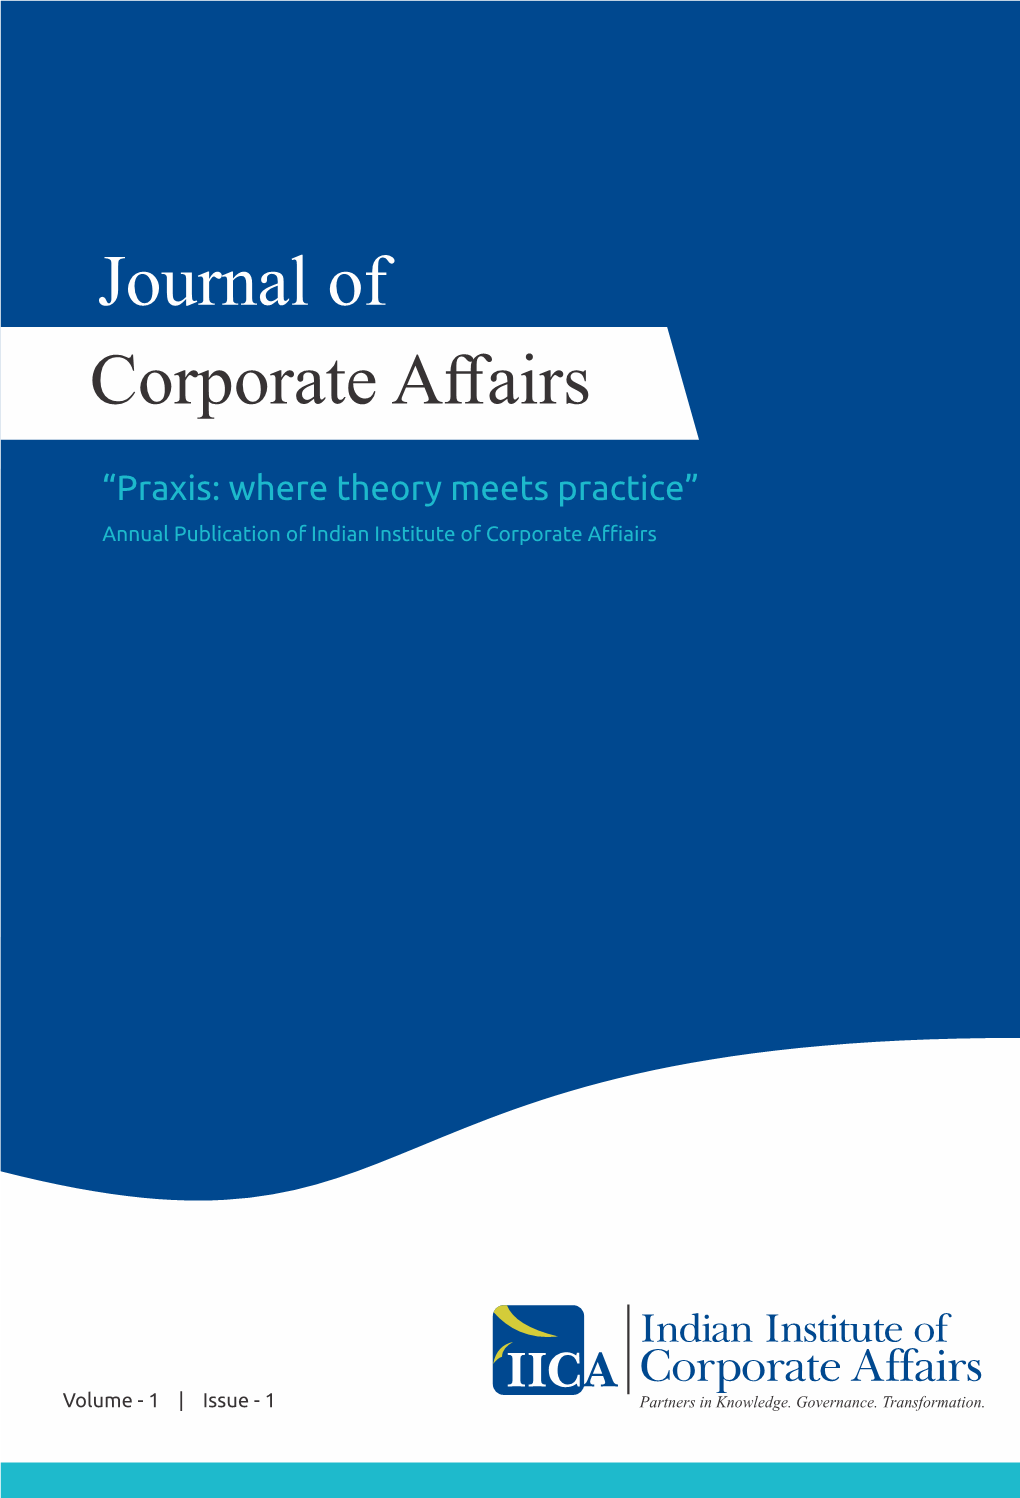 Journal of Corporate Affairs